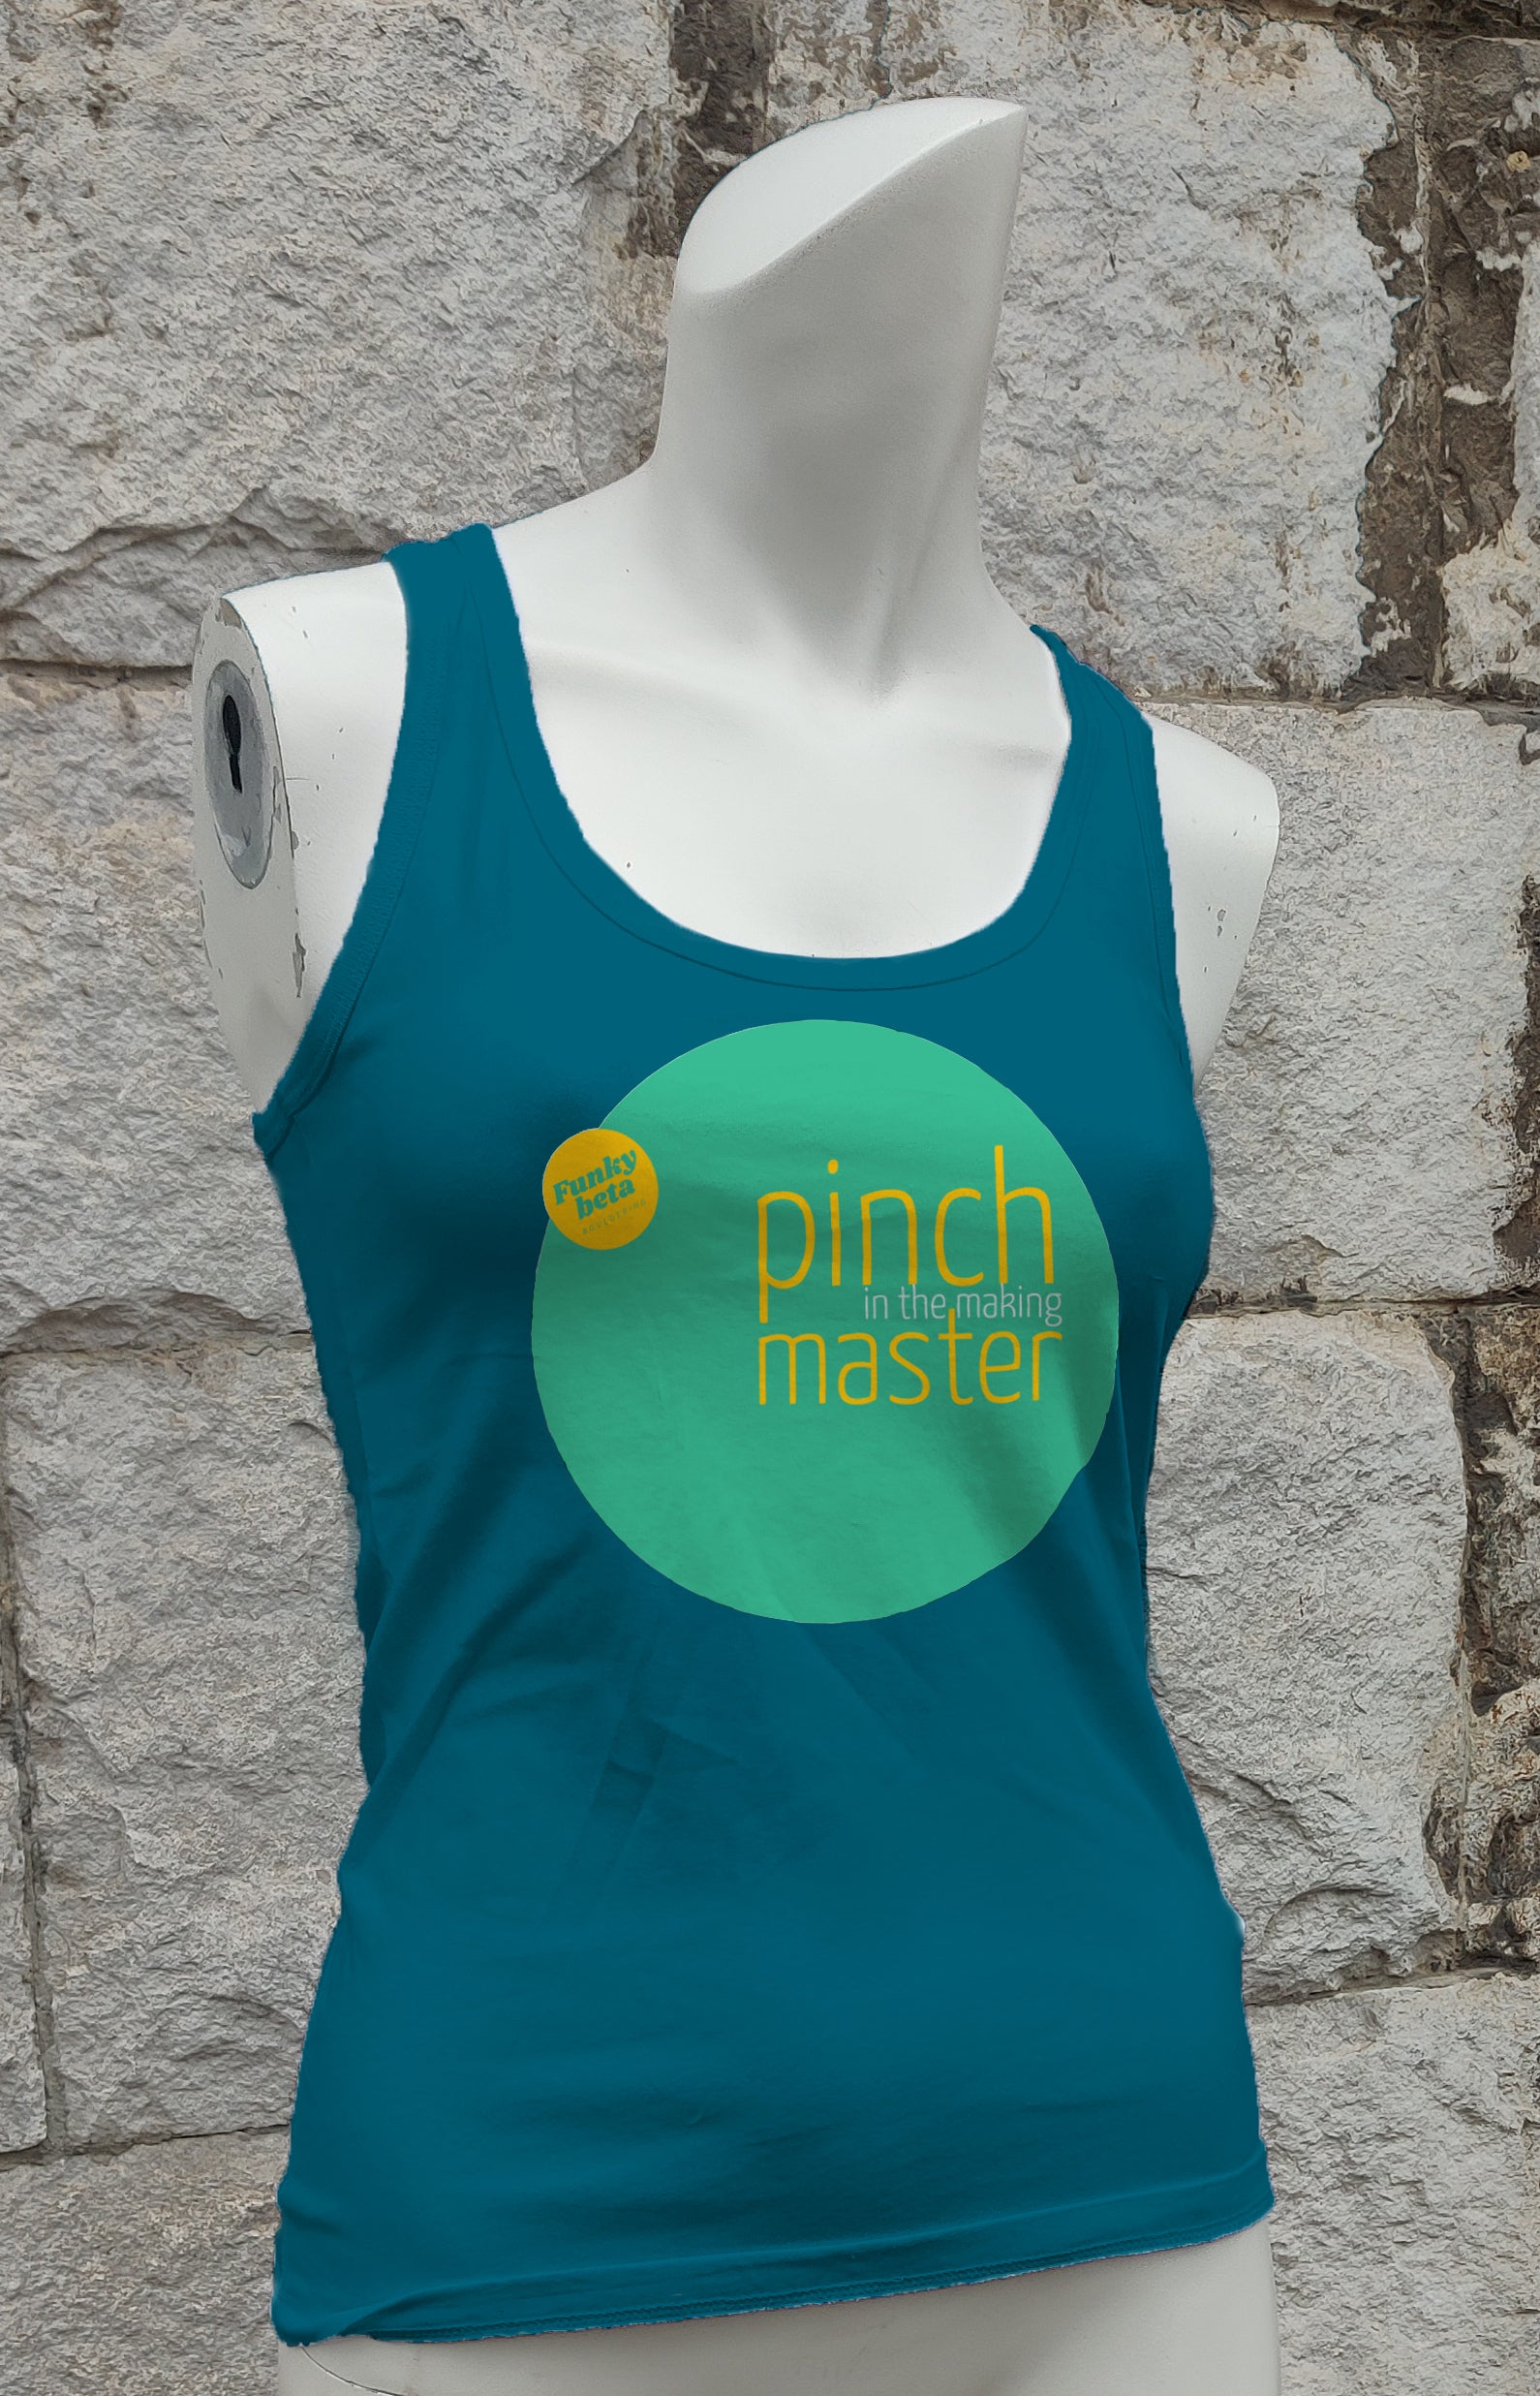 Pinch Master in the Making - Climbing T-Shirt for Ladies